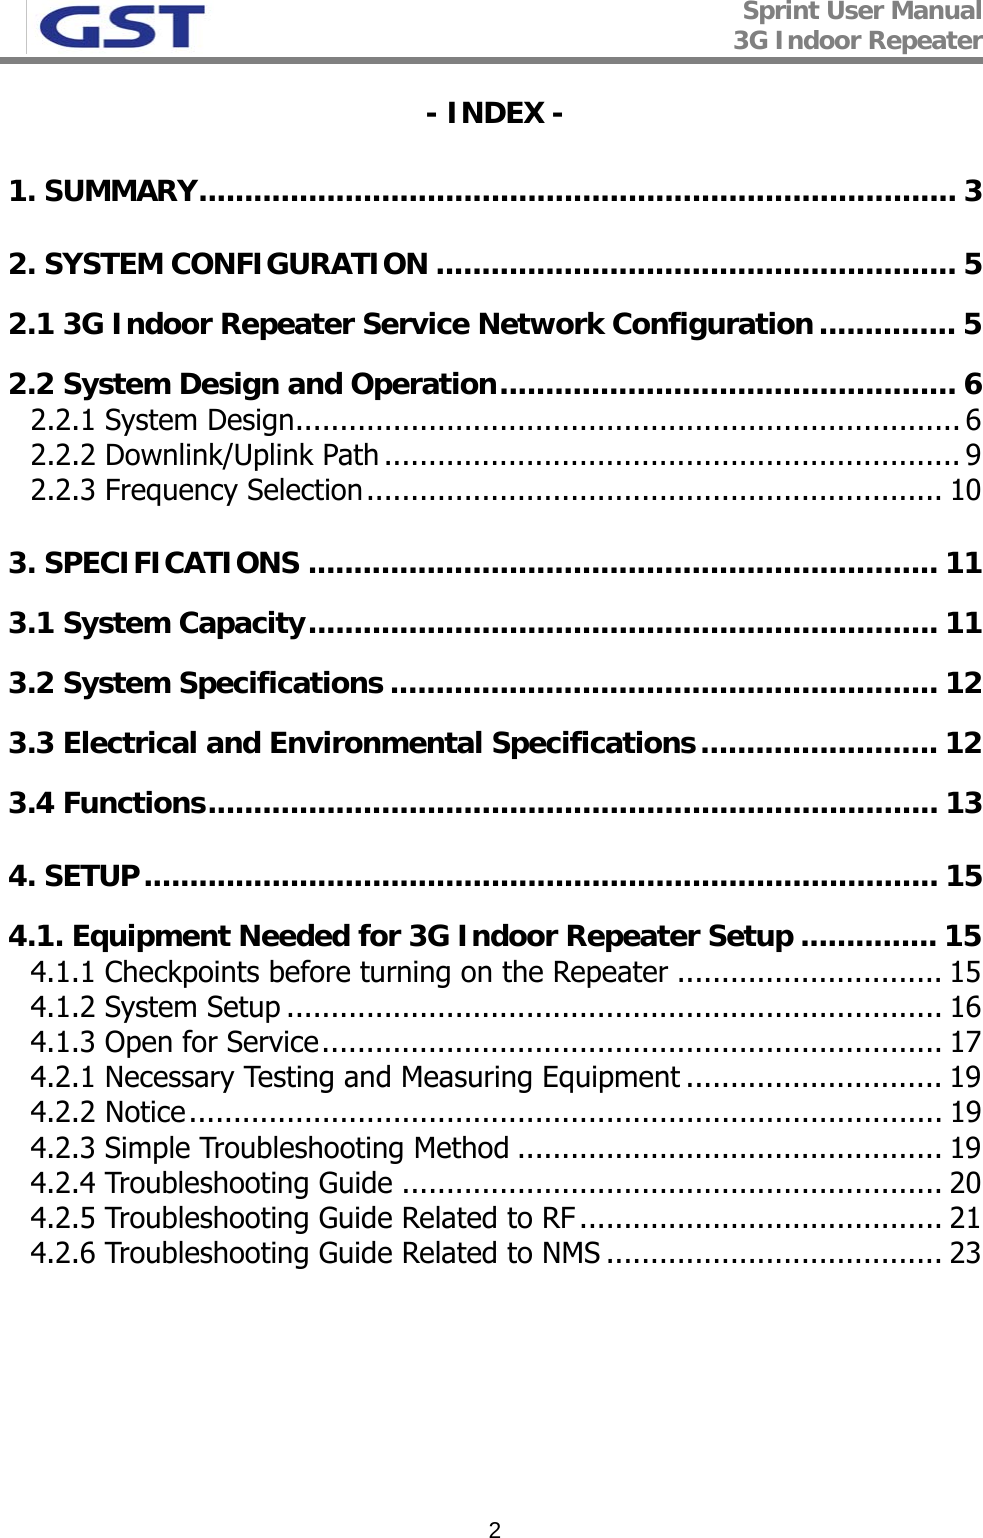 Sprint User Manual 3G Indoor Repeater   2- INDEX - 1. SUMMARY................................................................................... 3 2. SYSTEM CONFIGURATION ......................................................... 5 2.1 3G Indoor Repeater Service Network Configuration............... 5 2.2 System Design and Operation.................................................. 6 2.2.1 System Design........................................................................... 6 2.2.2 Downlink/Uplink Path ................................................................. 9 2.2.3 Frequency Selection................................................................. 10 3. SPECIFICATIONS ..................................................................... 11 3.1 System Capacity..................................................................... 11 3.2 System Specifications ............................................................ 12 3.3 Electrical and Environmental Specifications.......................... 12 3.4 Functions................................................................................ 13 4. SETUP....................................................................................... 15 4.1. Equipment Needed for 3G Indoor Repeater Setup ............... 15 4.1.1 Checkpoints before turning on the Repeater .............................. 15 4.1.2 System Setup .......................................................................... 16 4.1.3 Open for Service...................................................................... 17 4.2.1 Necessary Testing and Measuring Equipment ............................. 19 4.2.2 Notice..................................................................................... 19 4.2.3 Simple Troubleshooting Method ................................................ 19 4.2.4 Troubleshooting Guide ............................................................. 20 4.2.5 Troubleshooting Guide Related to RF ......................................... 21 4.2.6 Troubleshooting Guide Related to NMS ...................................... 23  